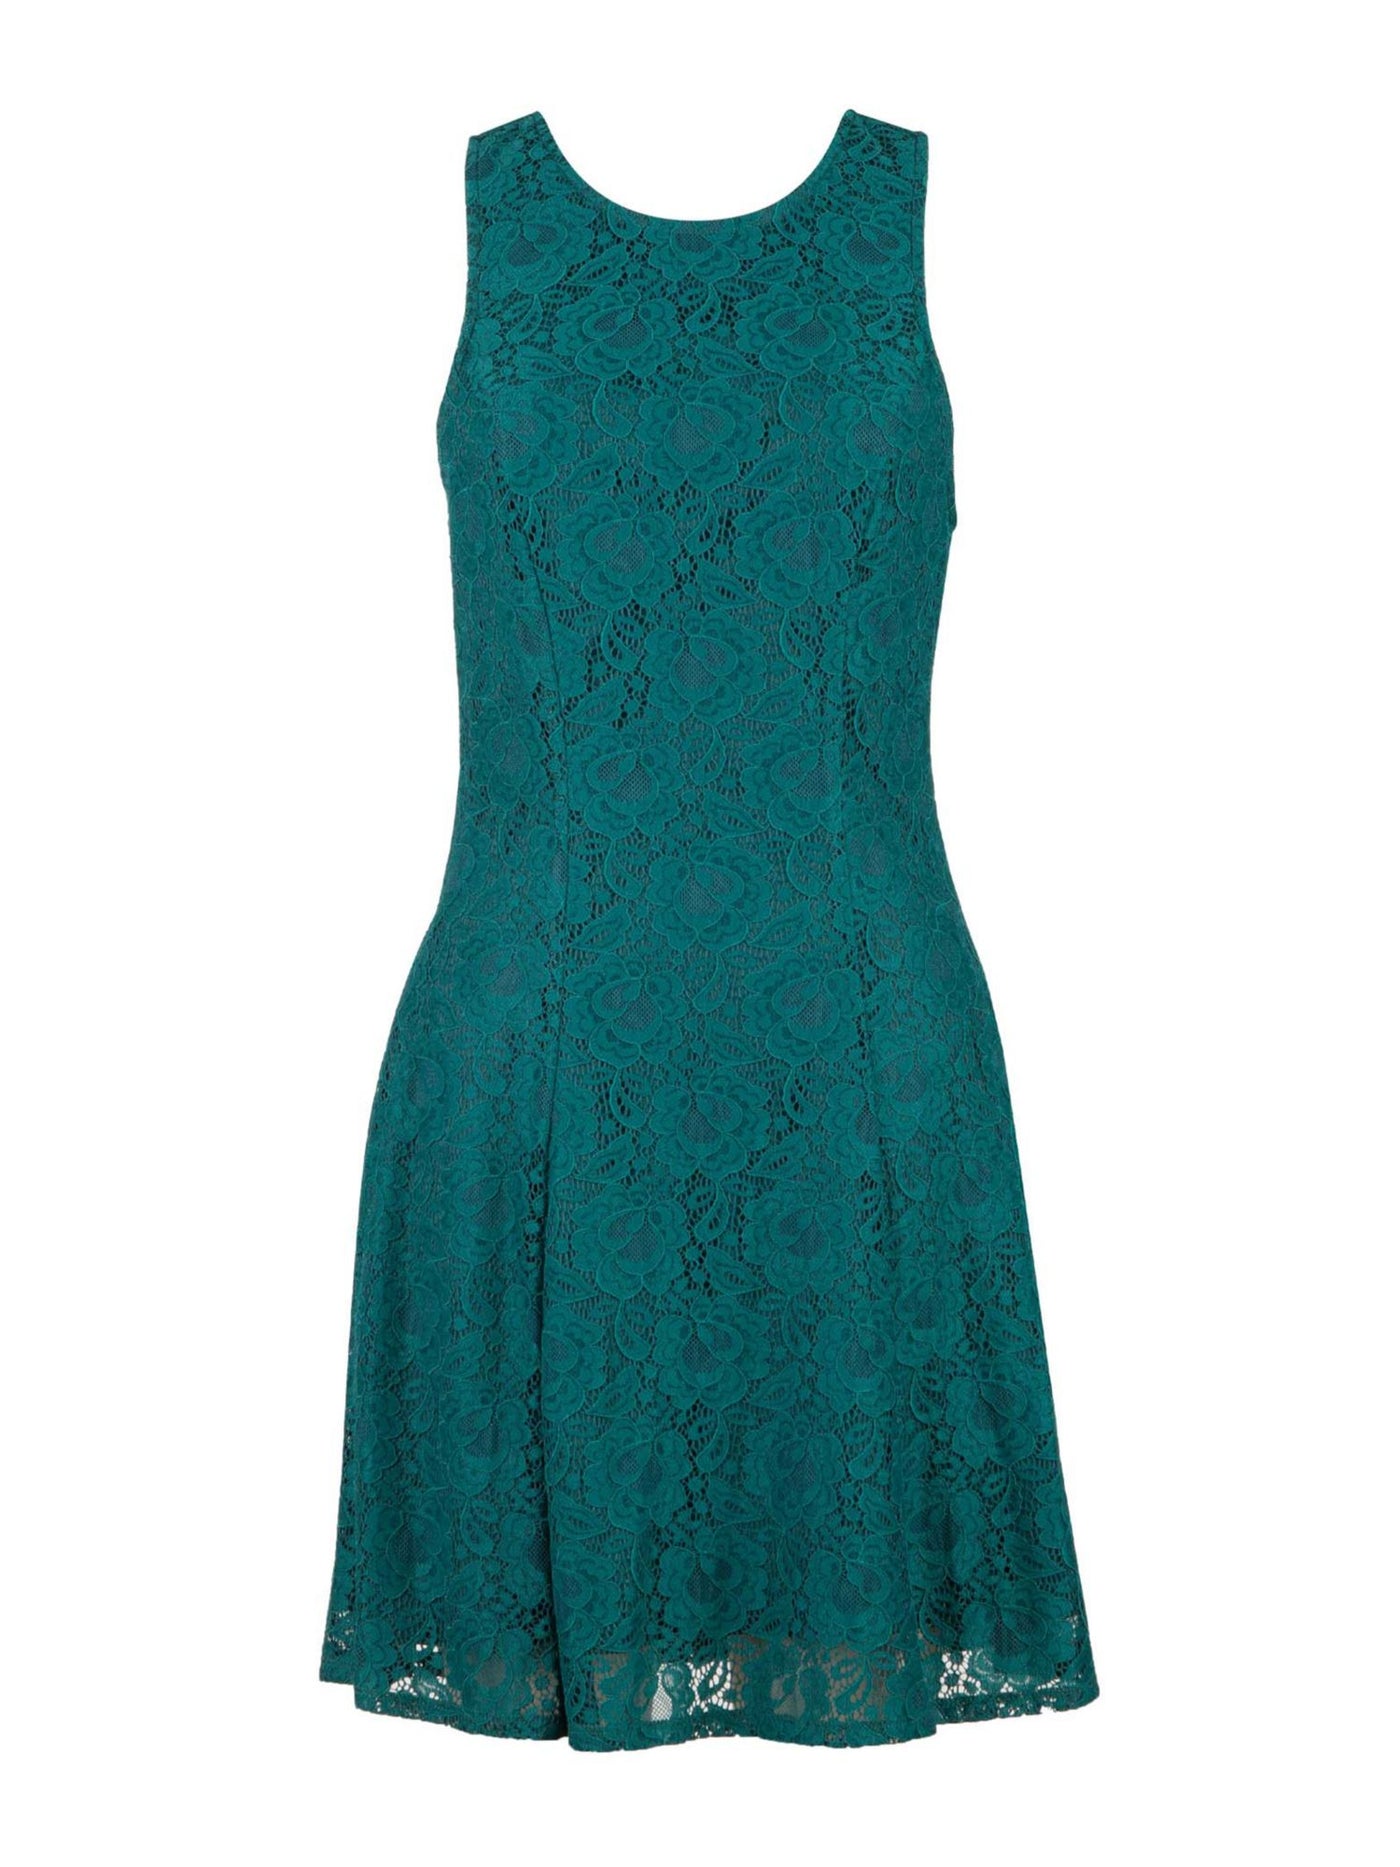 SPEECHLESS Womens Teal Stretch Lace Back Tie Closure Lined Sleeveless Scoop Neck Above The Knee Party Fit + Flare Dress Juniors M